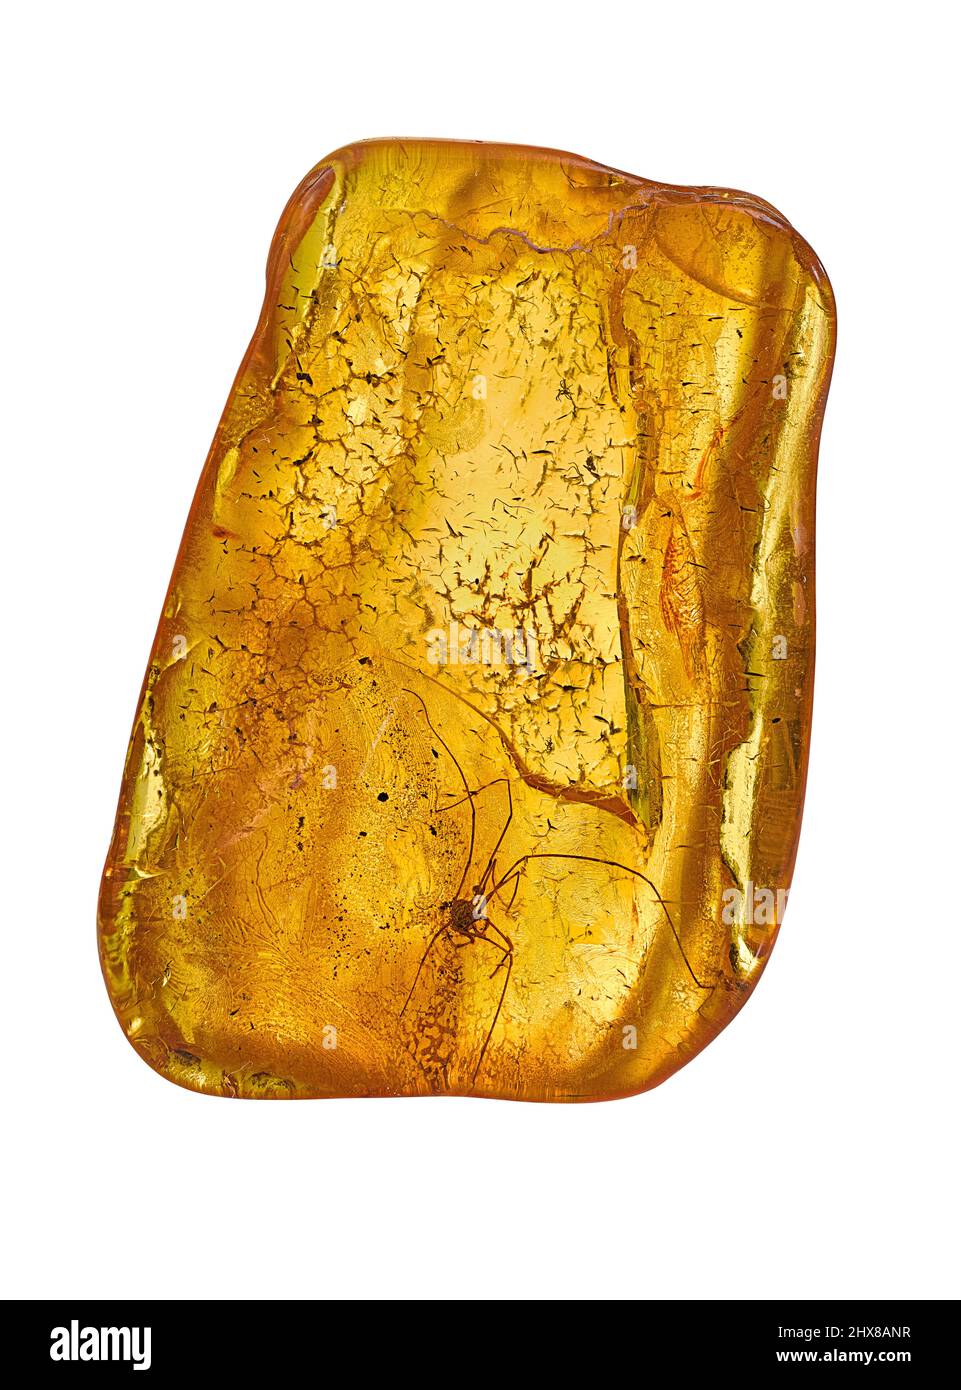 Spider (Arachnida: opiliones: family indet. Ypresian - Priabonian, Lower - Upper Eocene) preserved in Amber. From Baltic region, Europe. Stock Photo